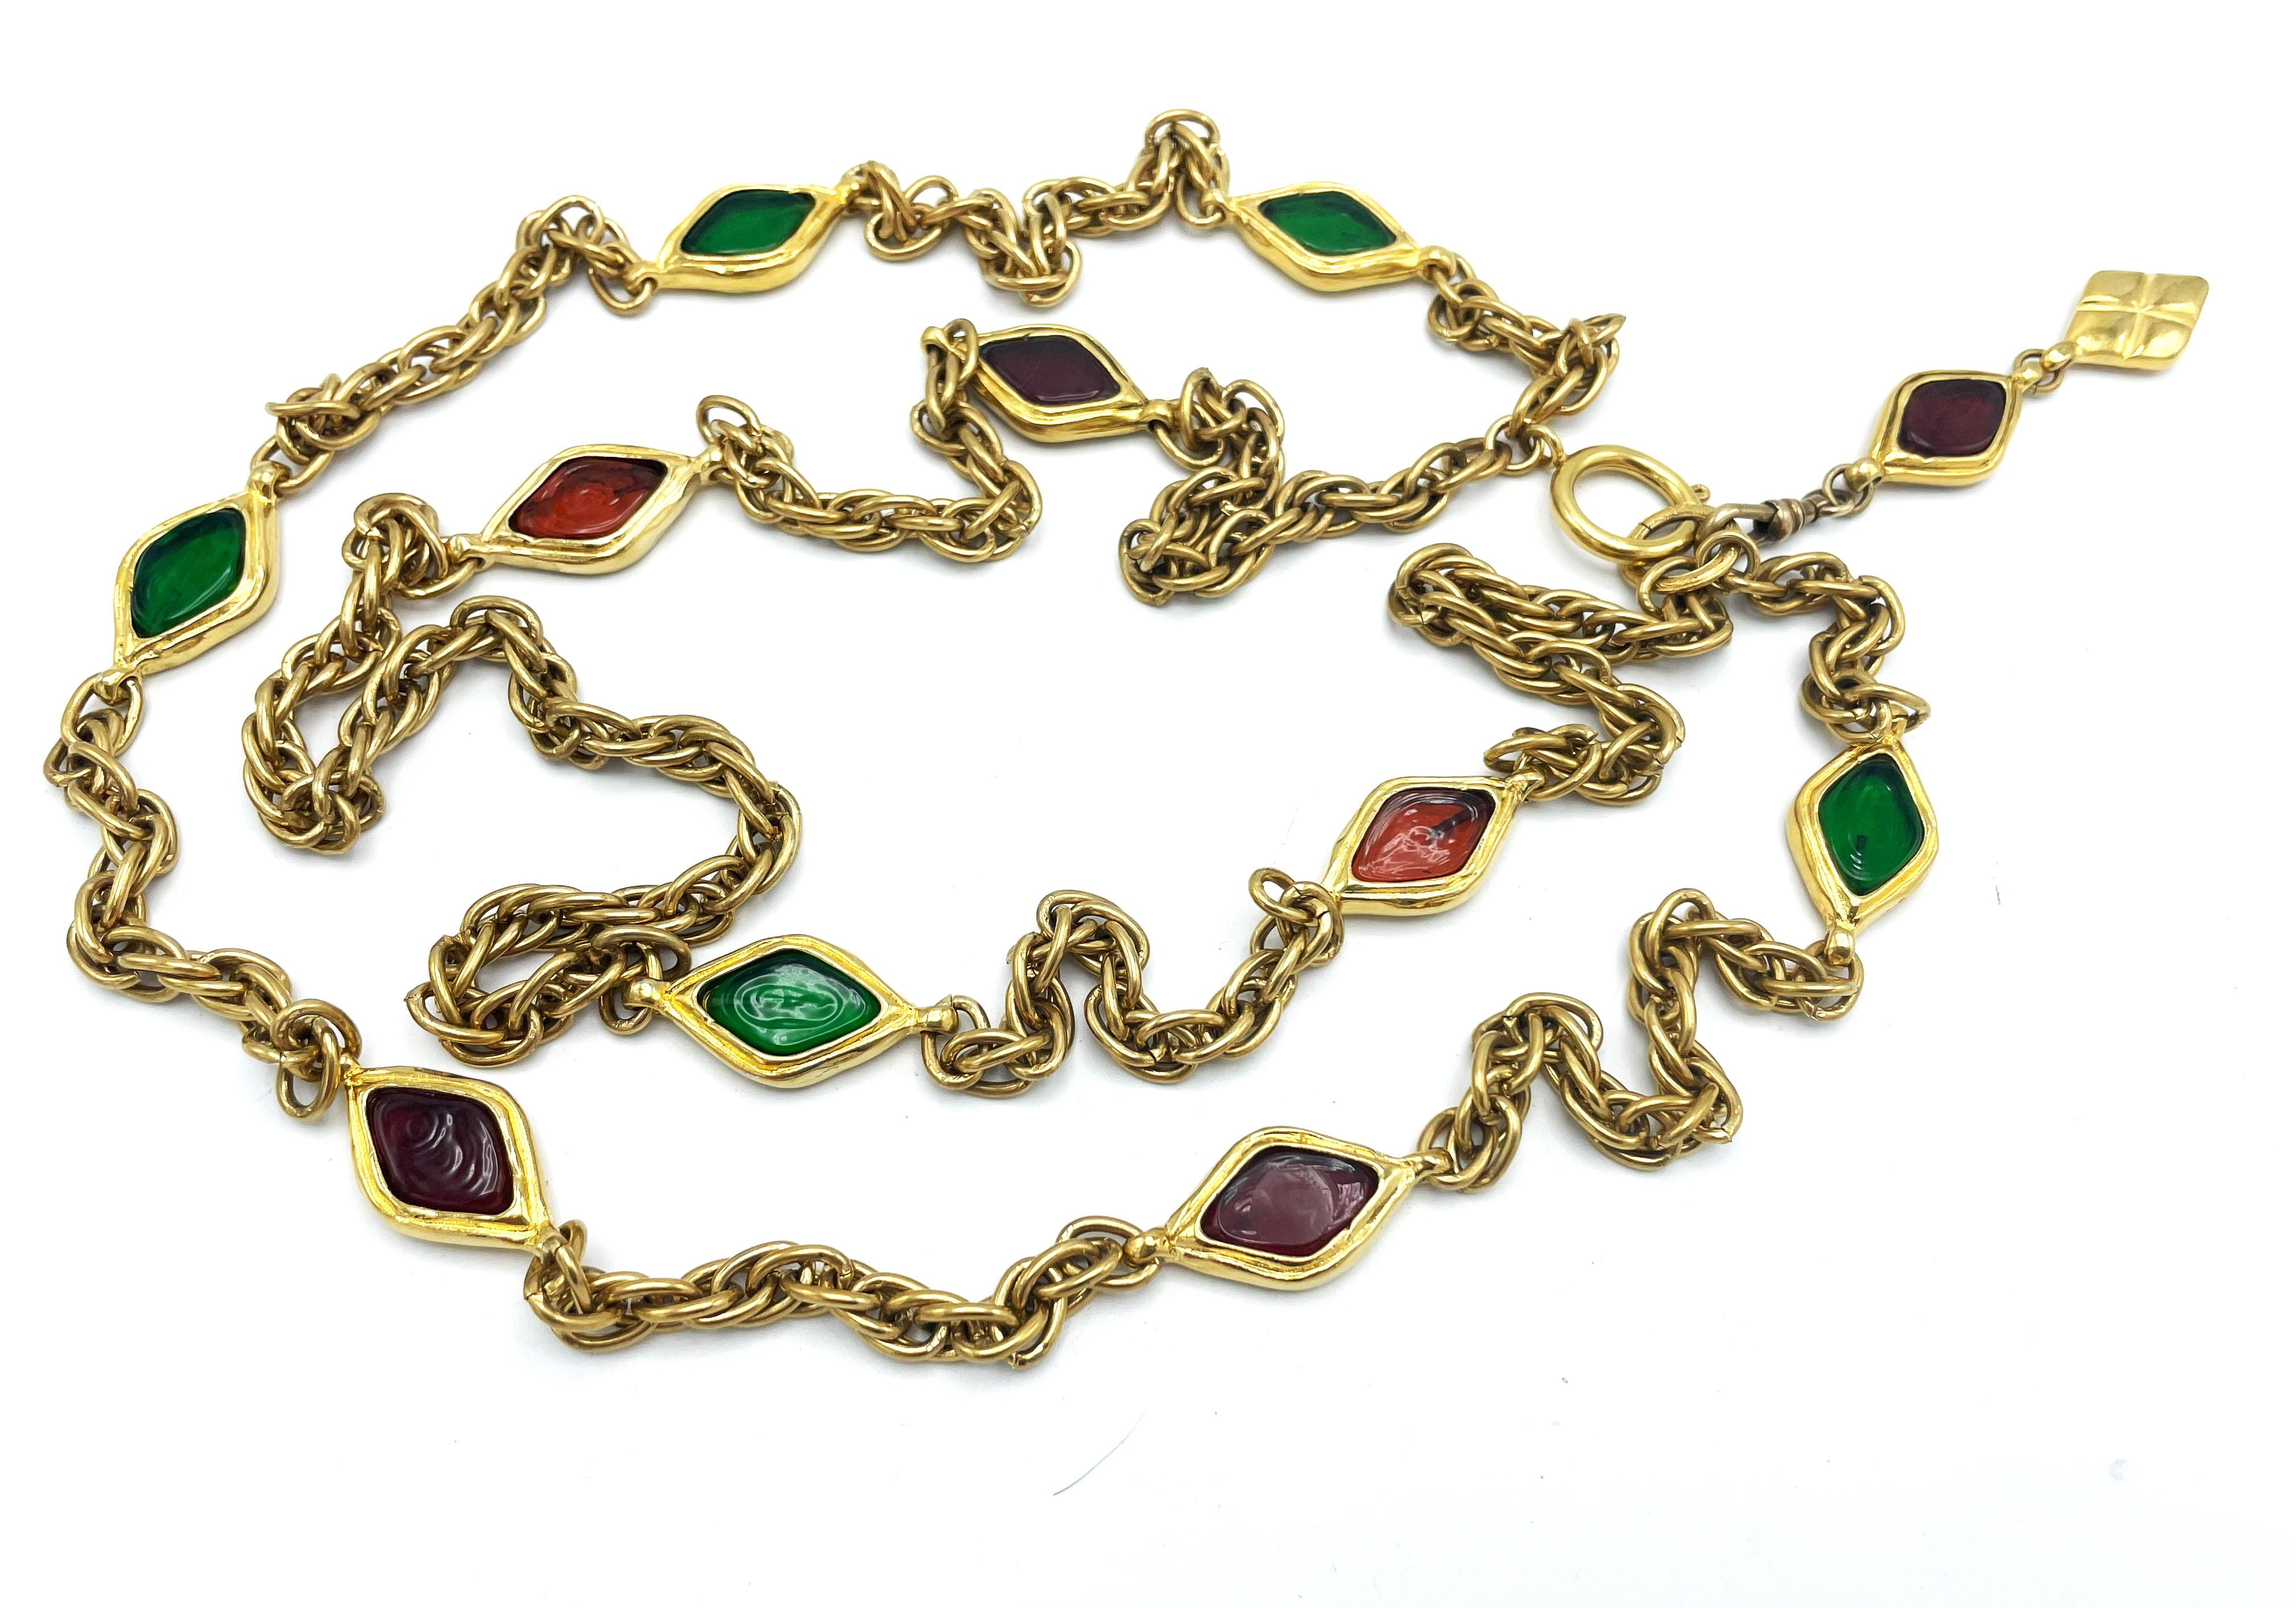  2 row Chanel necklace with red and green pate the verre, gold plated, 1970/80's For Sale 9